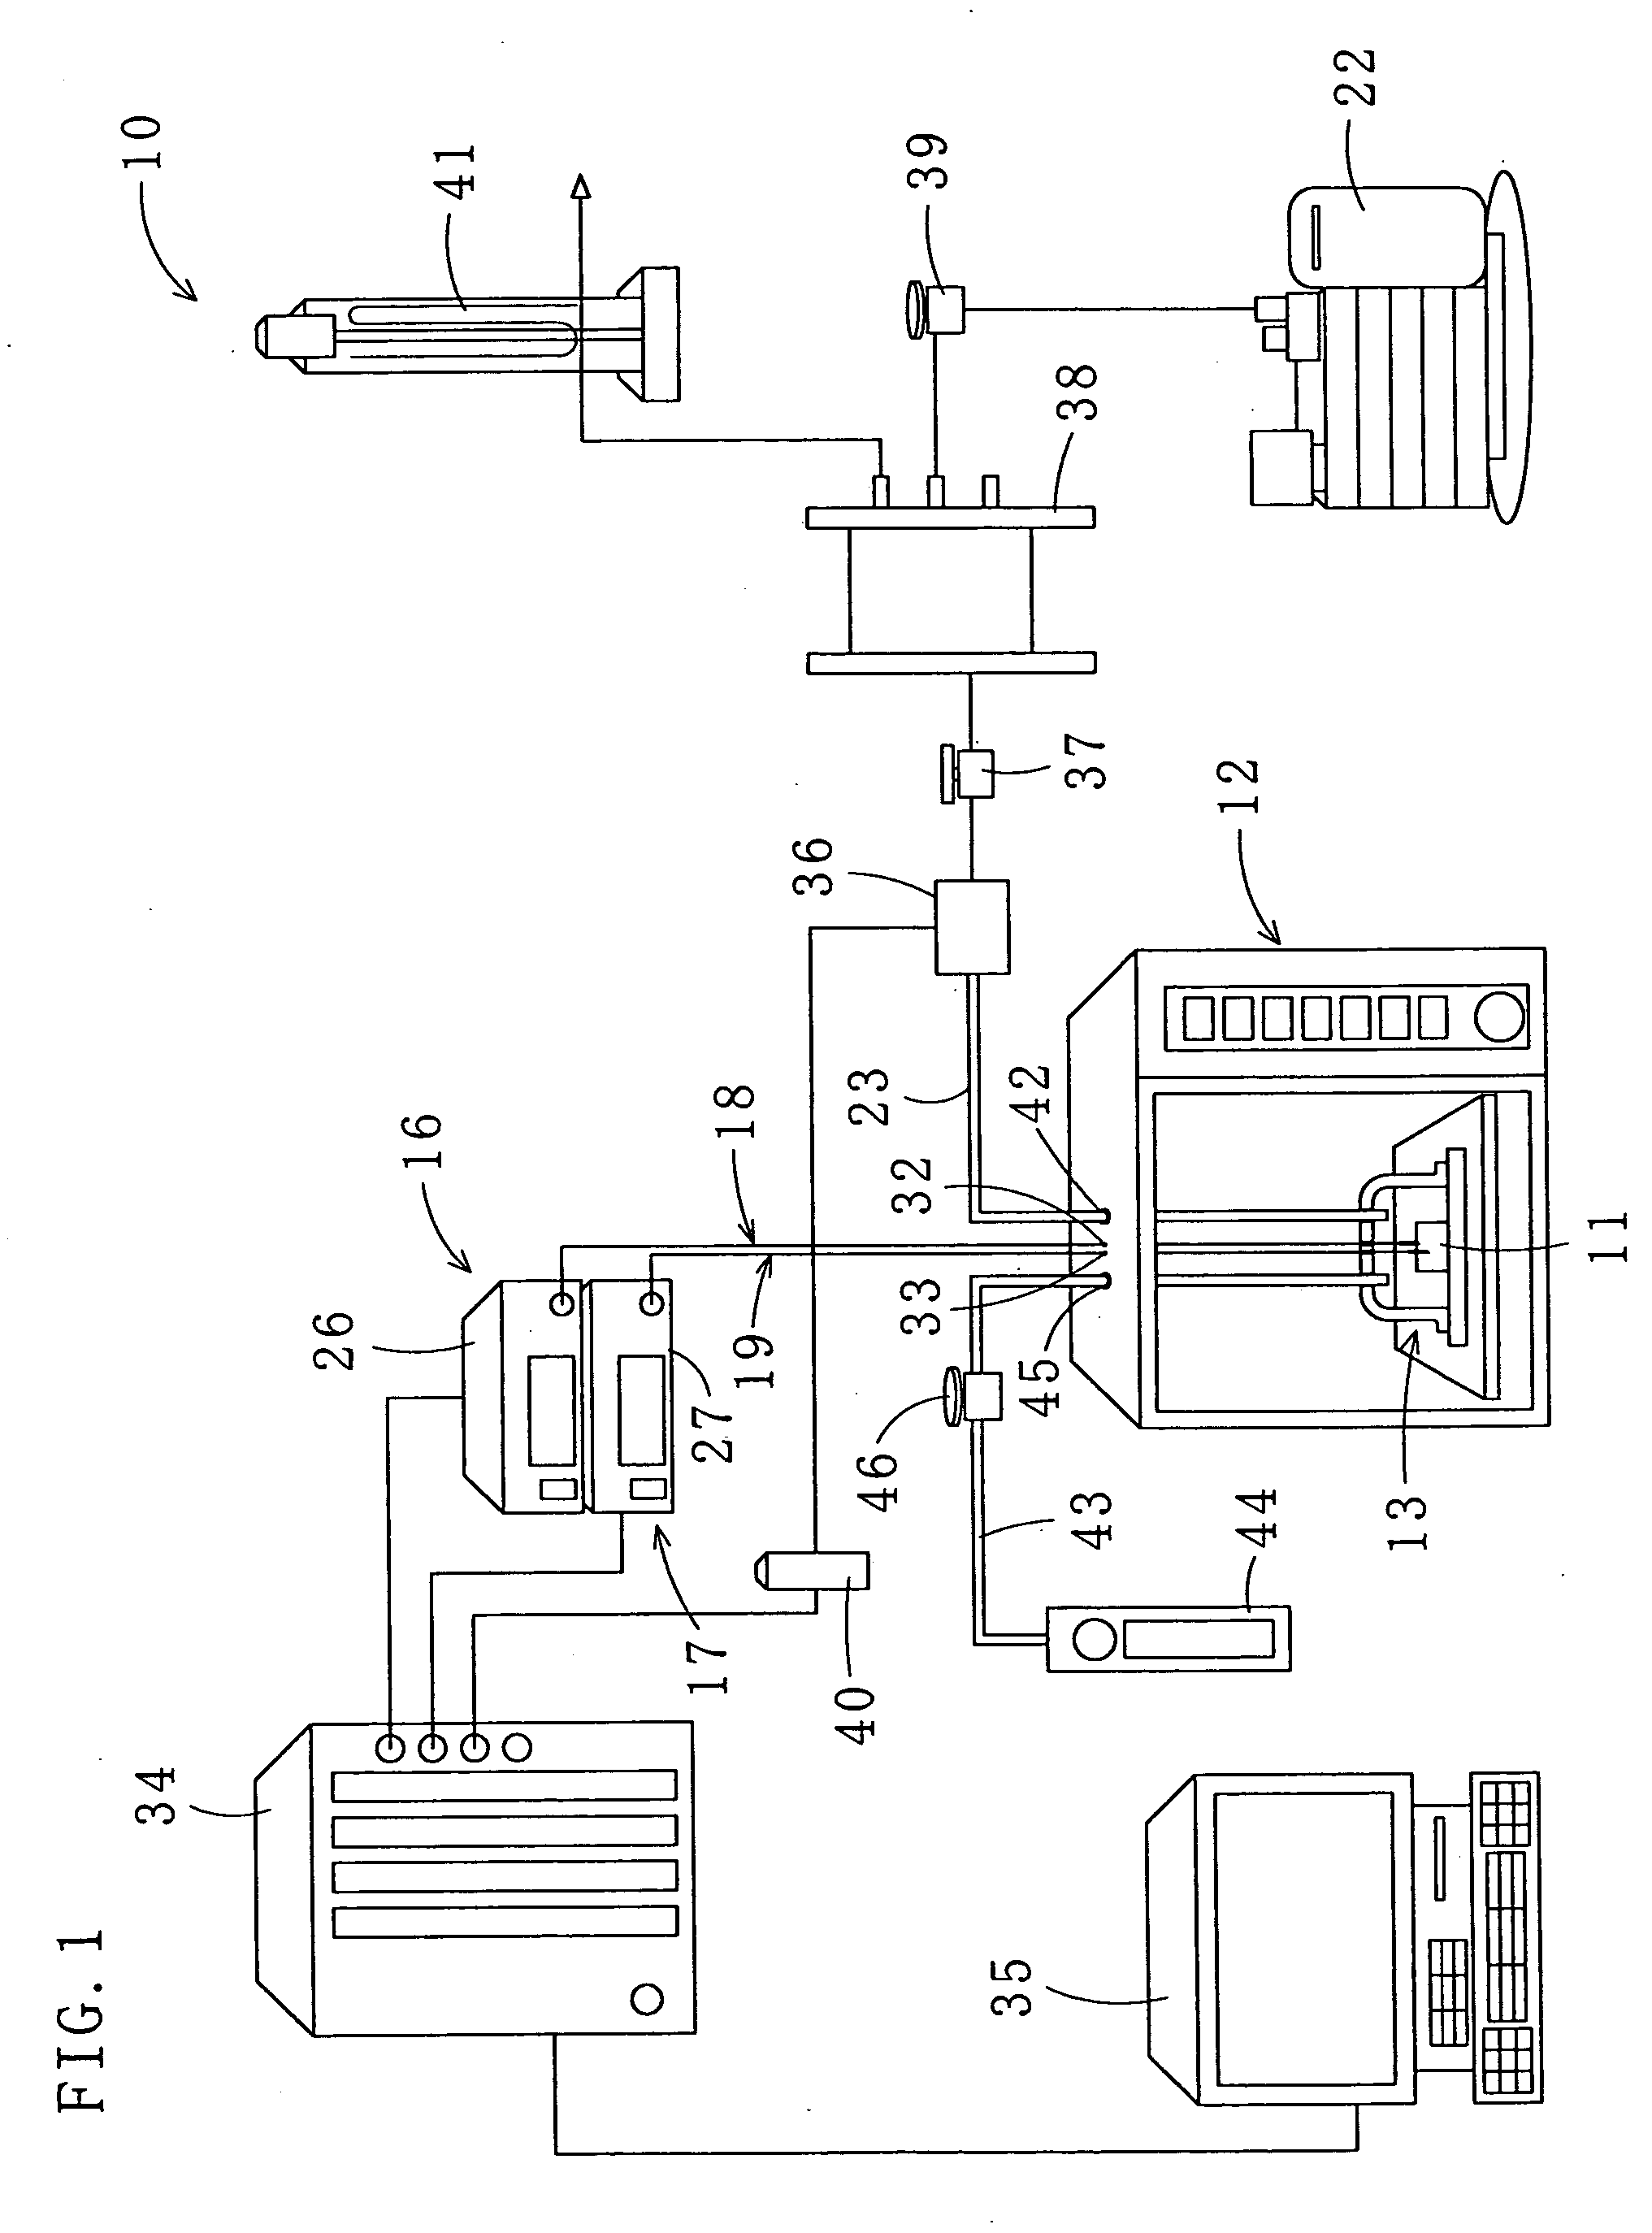 Method And Apparatus For Drying Under Reduced Pressure Using Microwaves